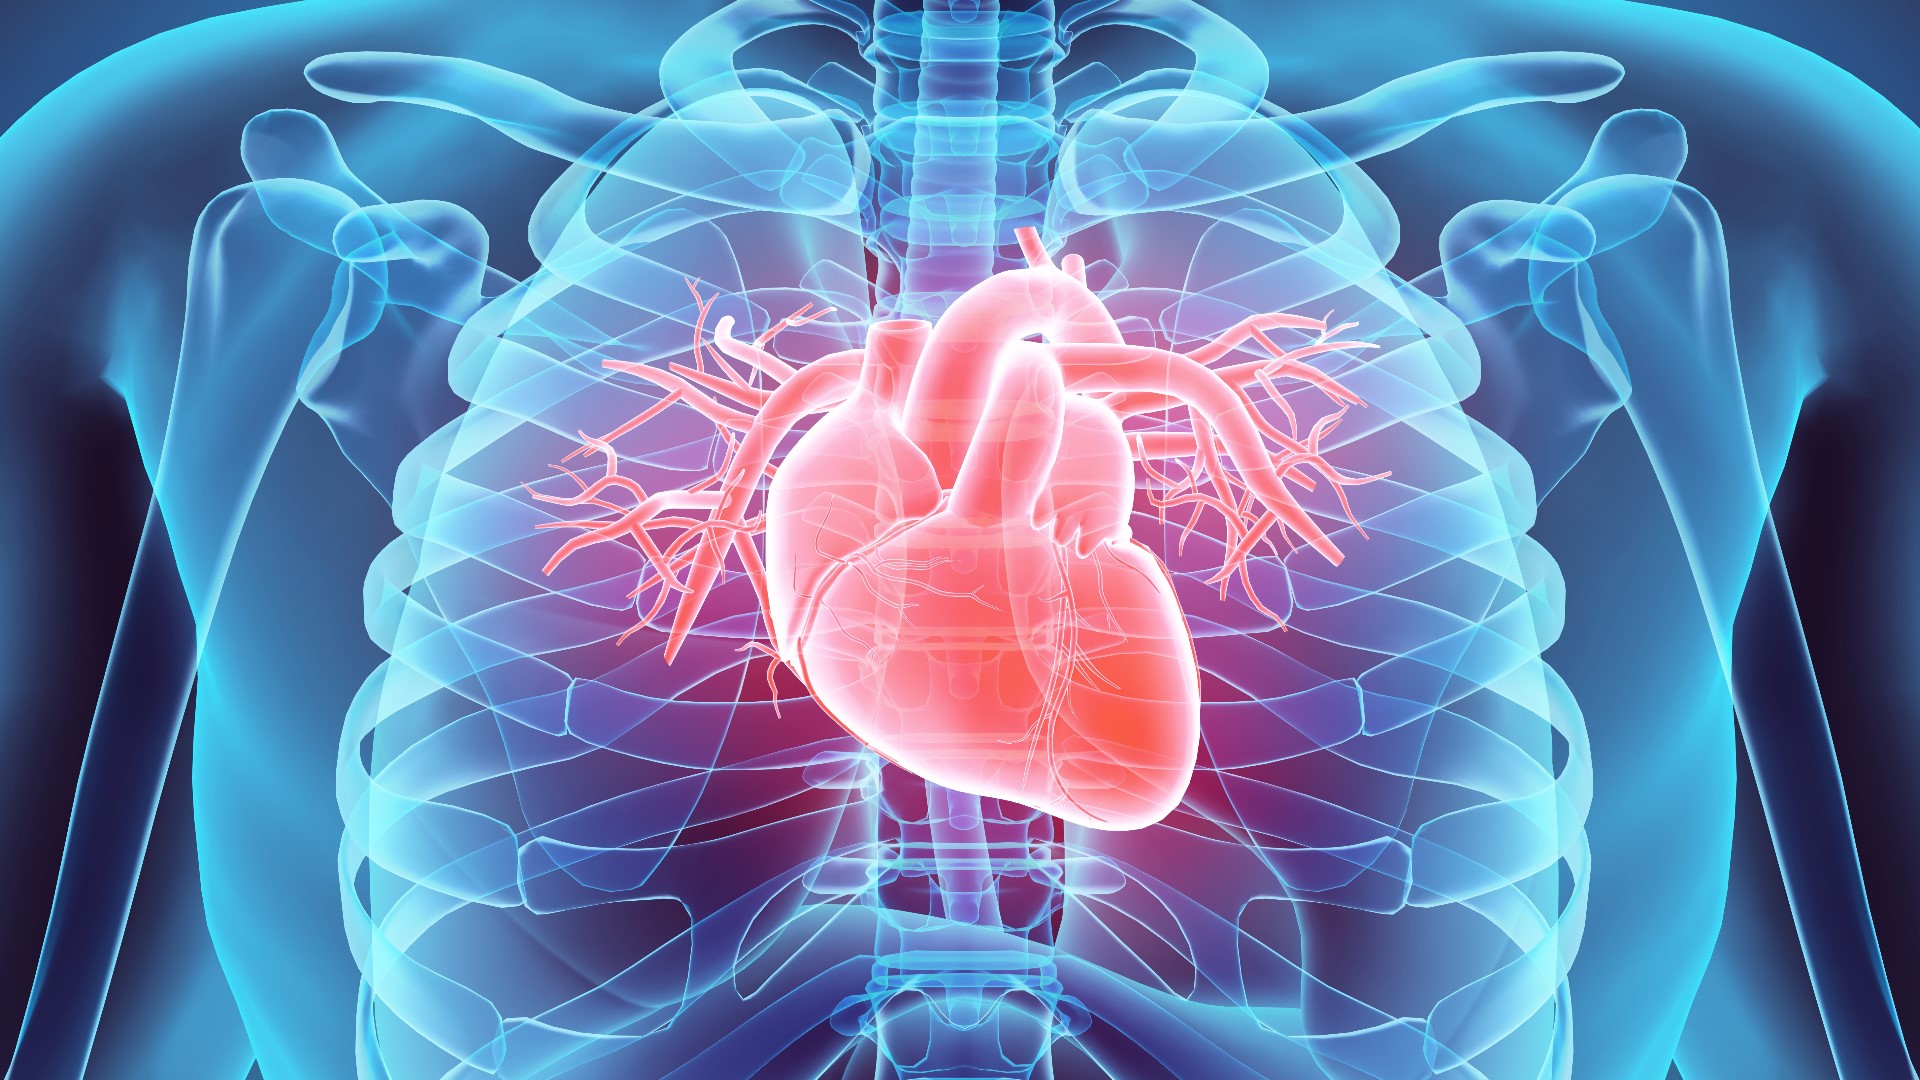 Unlike cardiac arrests, heart attacks are a circulation problem. When circulation is blocked or cut off, blood is no longer supplied to the heart.